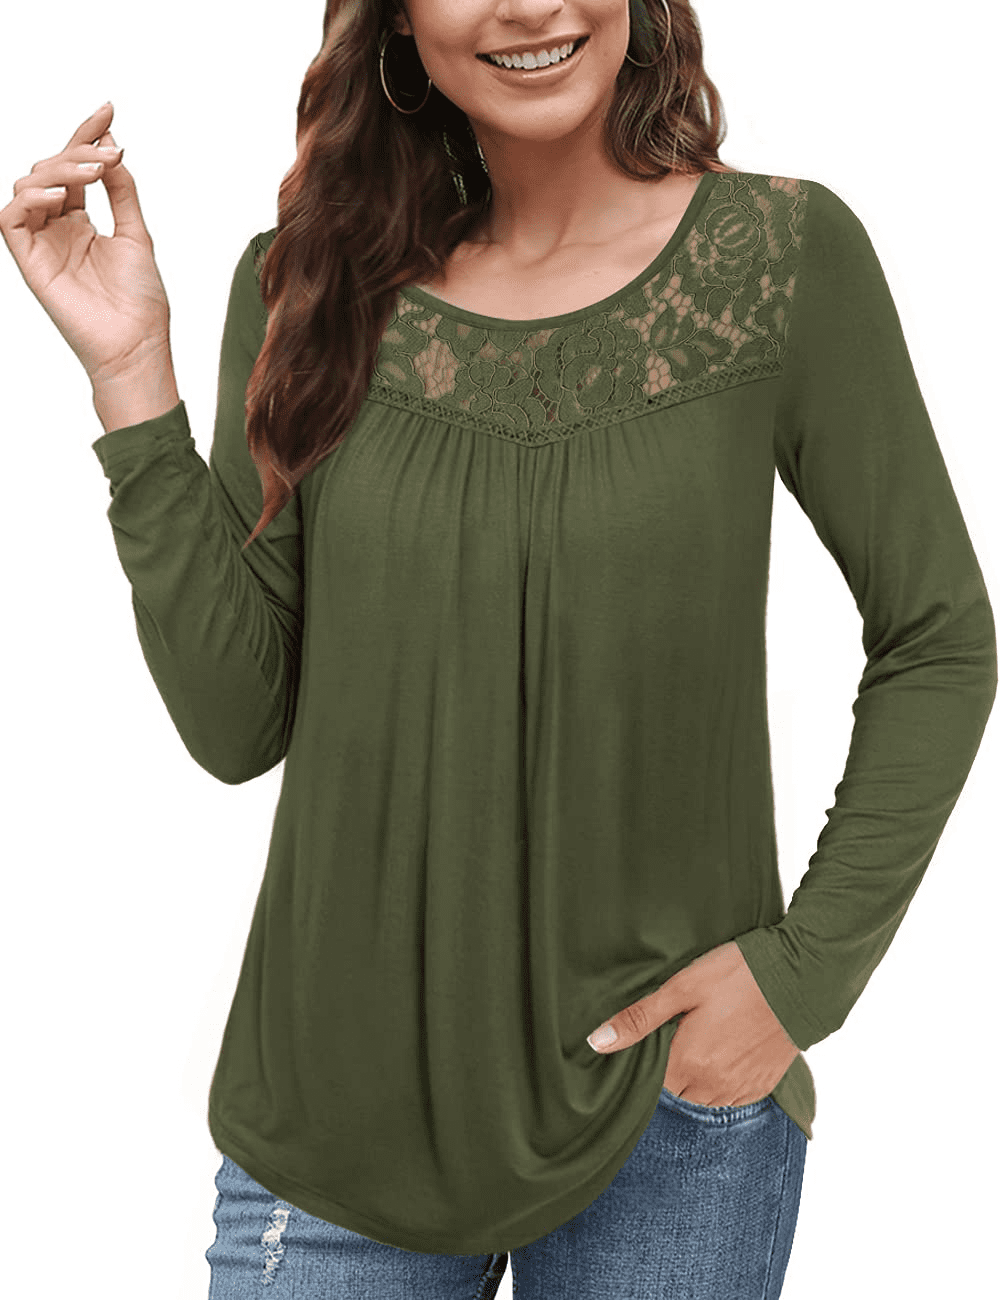 VOIANLIMO Women's Plus Size Tops Casual Long Sleeve Shirts Lace Pleated ...